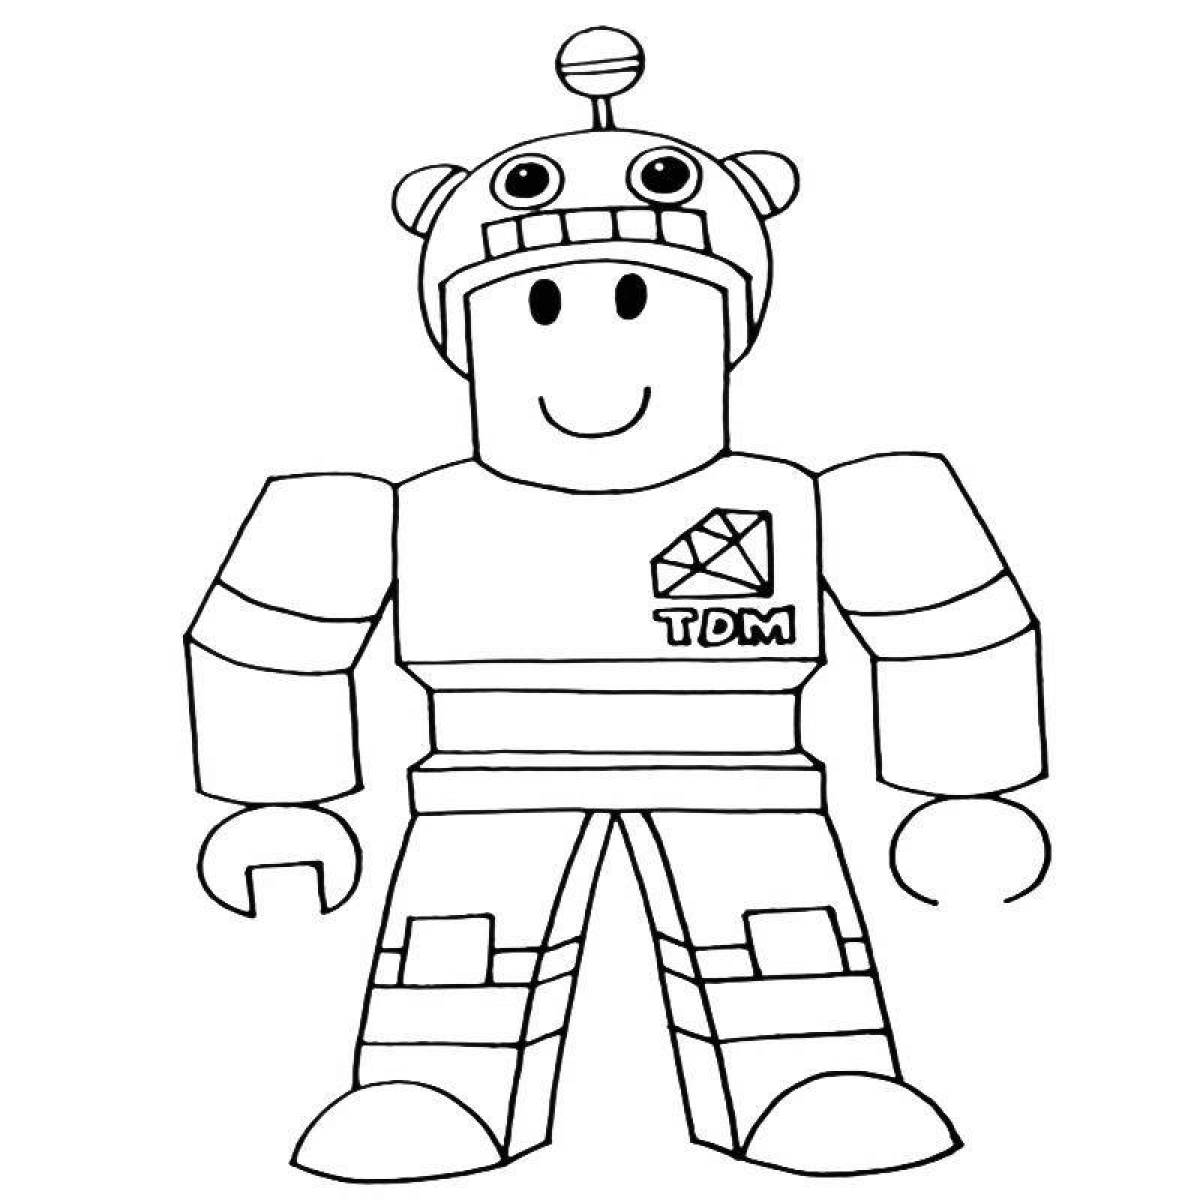 Roblox creative coloring book for girls